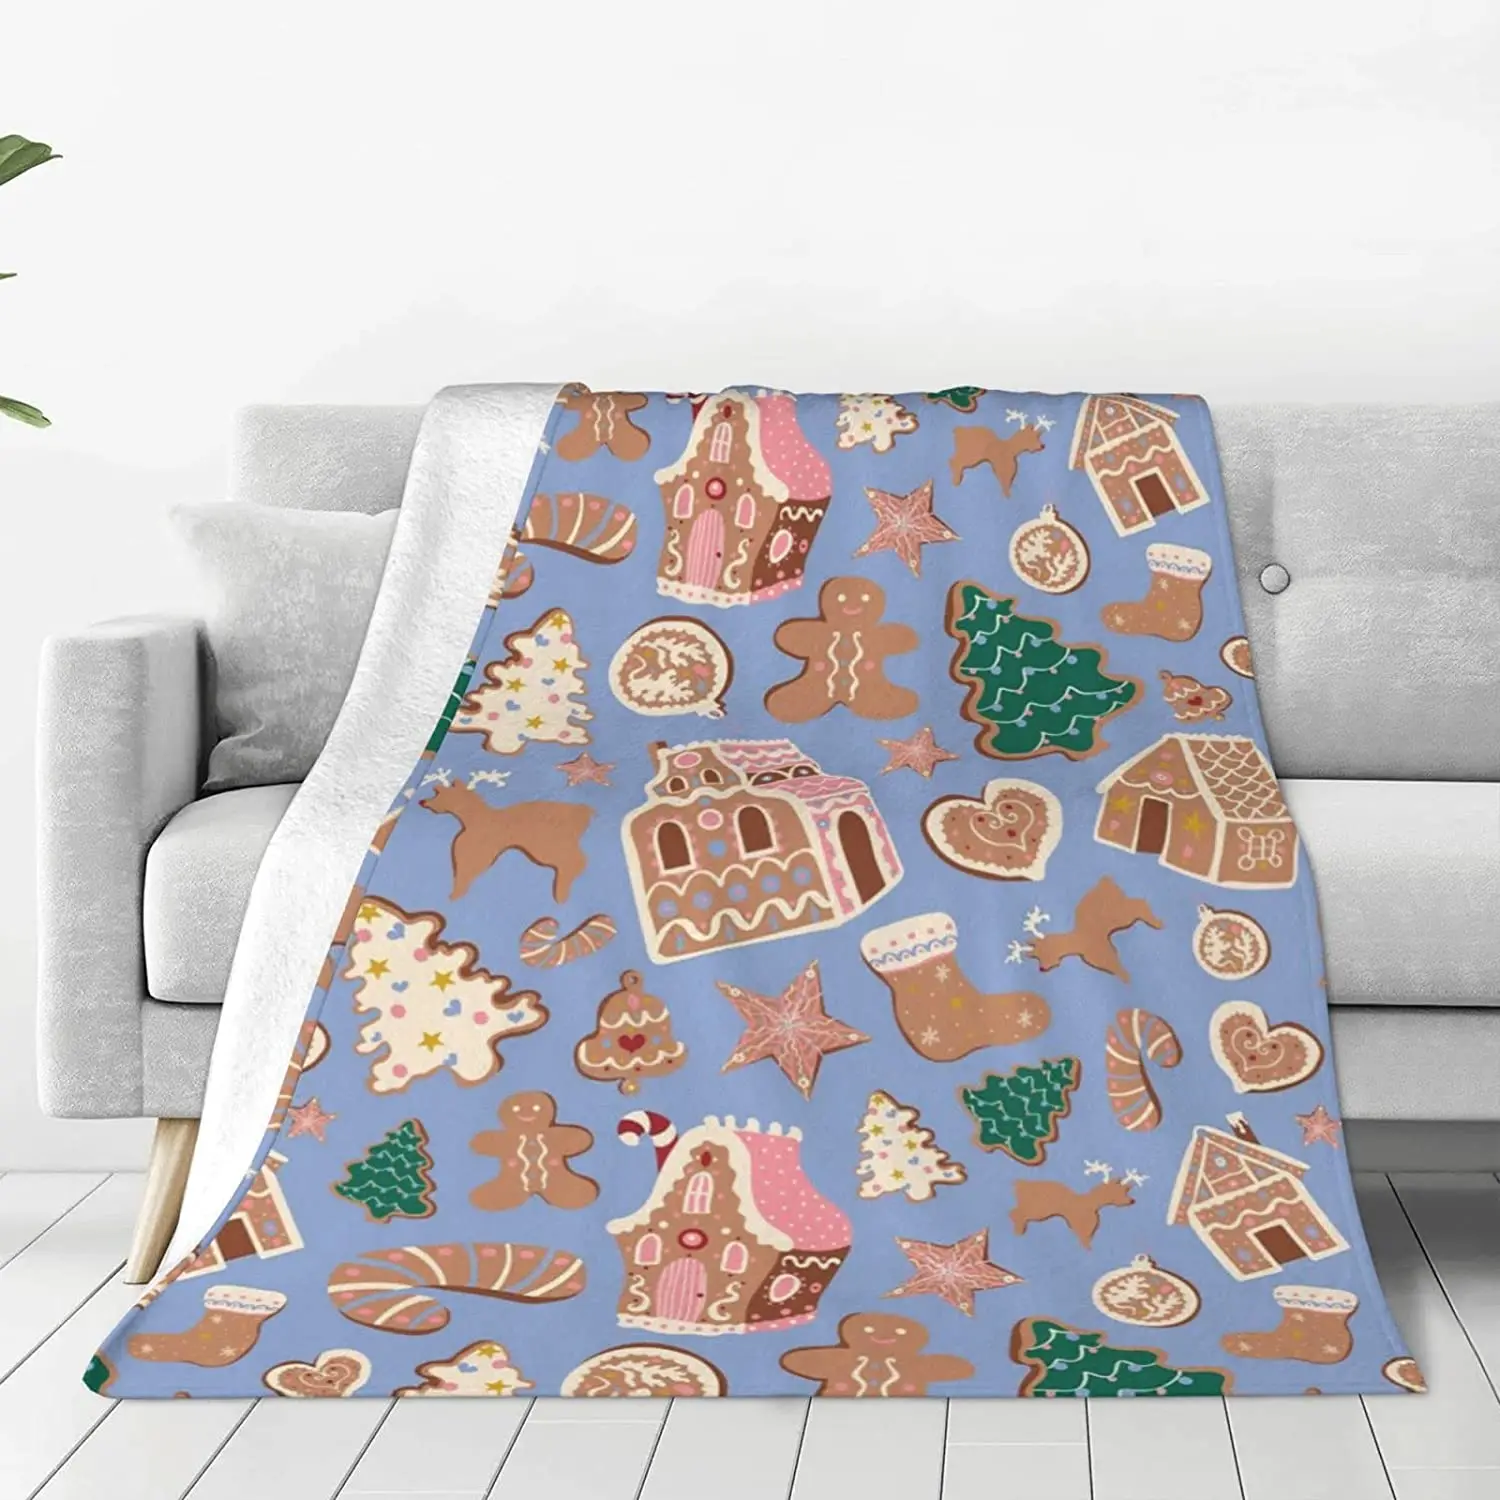 

Cute Christmas Gingerbread Houses Cookies Throw Blanket Ultra Soft Cozy Warm Throw Lightweight Blanket for Bed Couch Travel Home